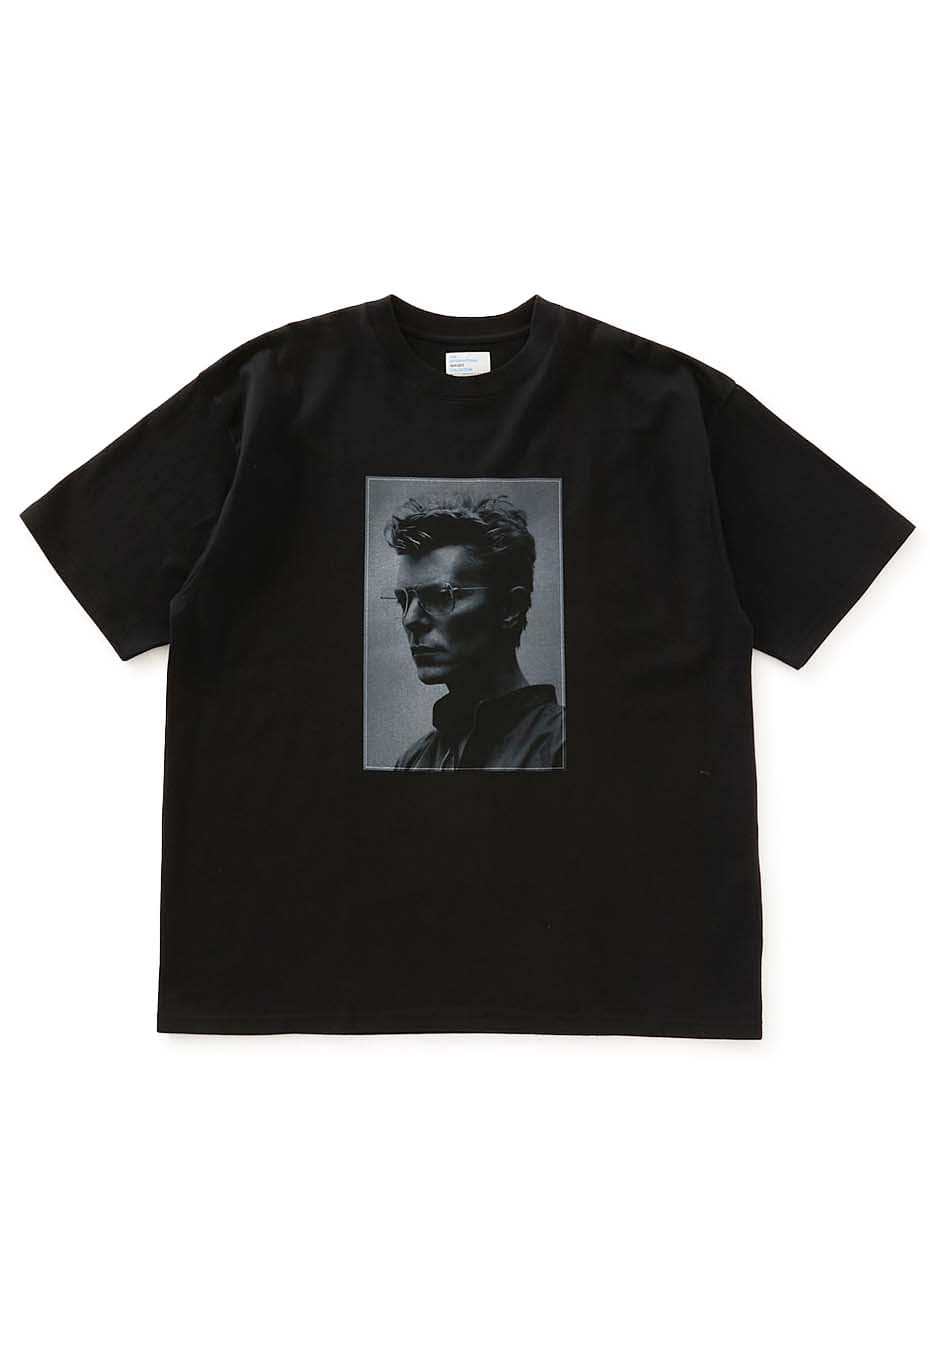 THE INTL IMAGE Short Sleeve T-shirts David Bowie